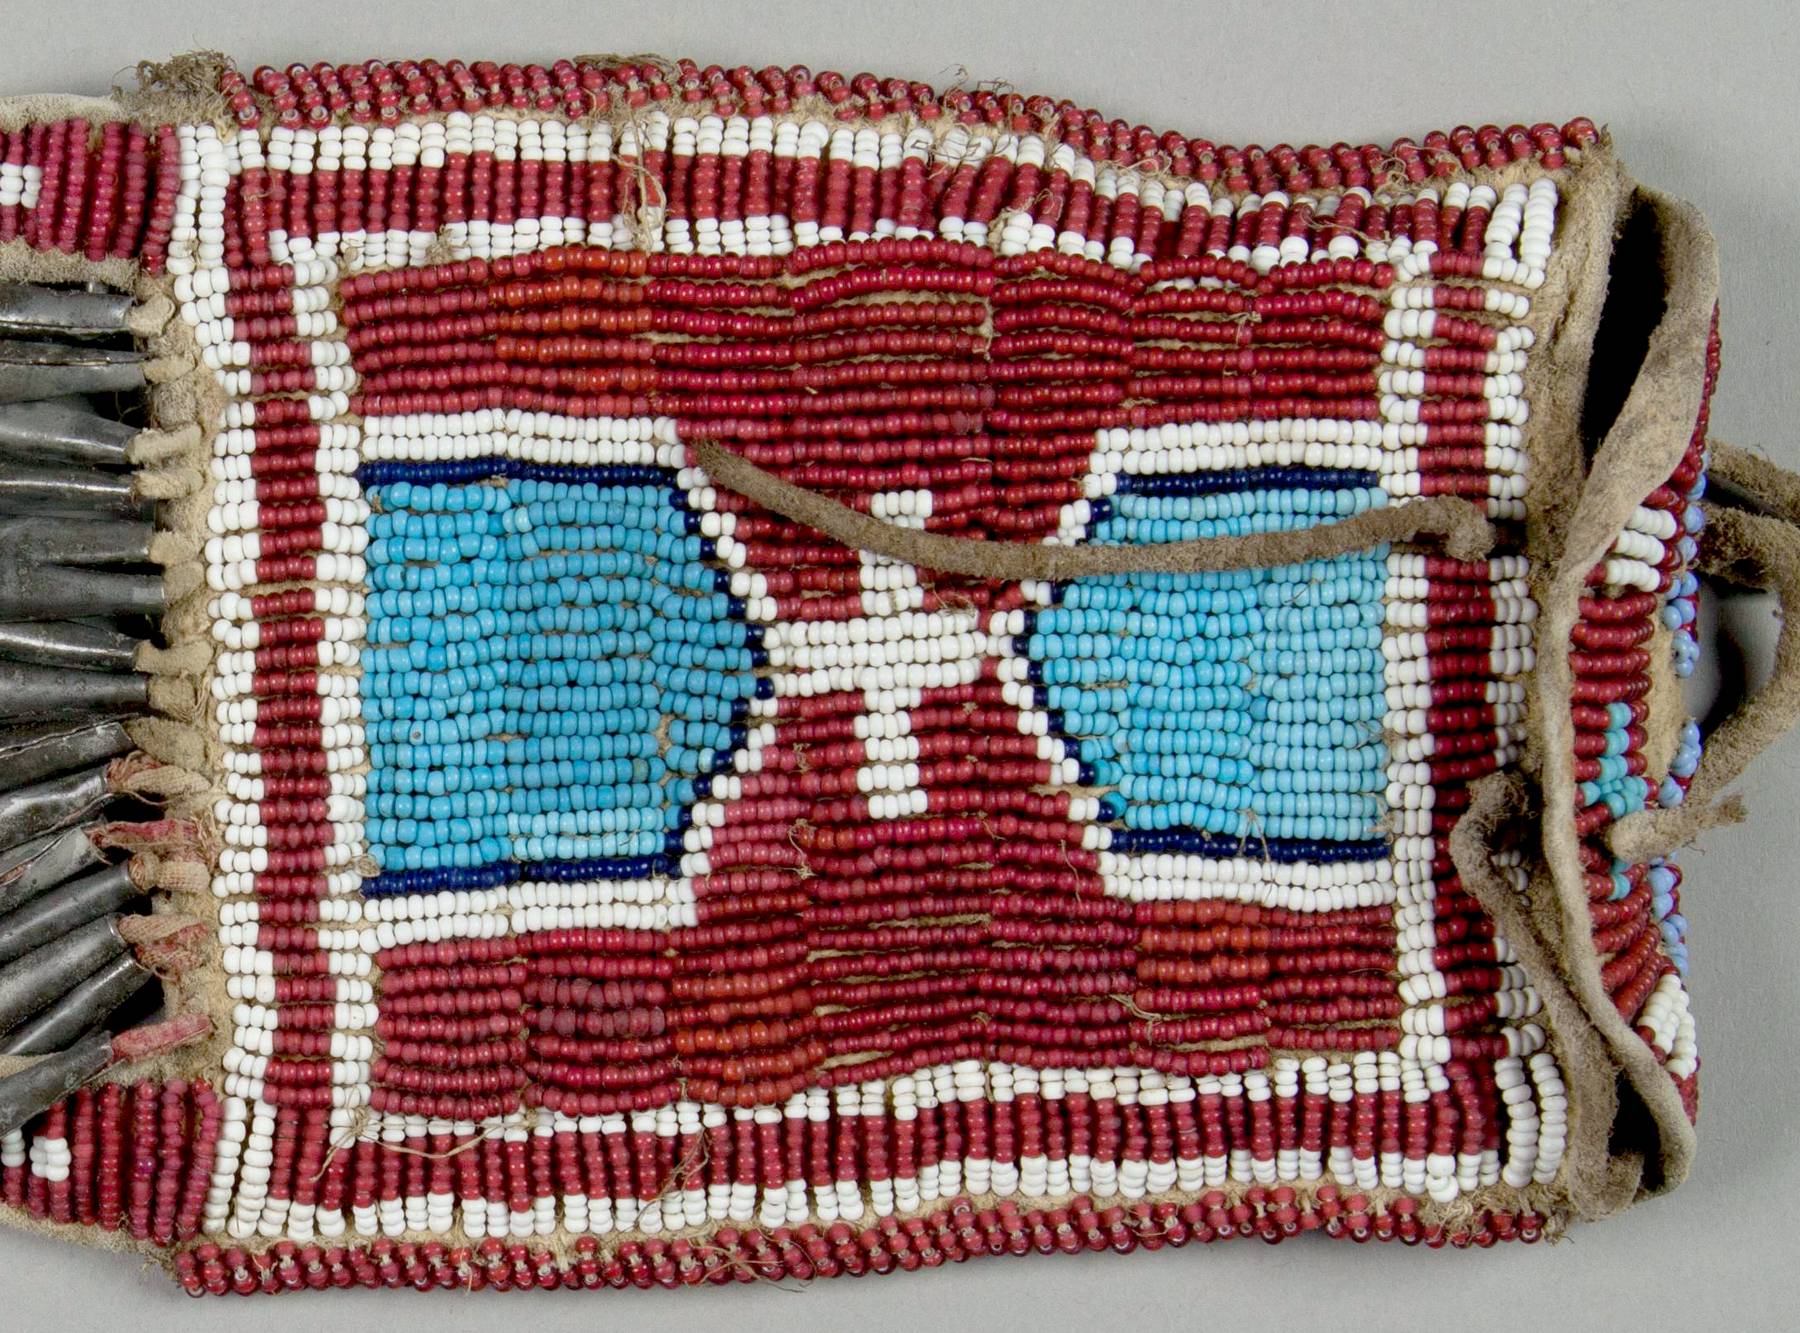 A strike a light bag from NMNH. Its background is beaded with red white inside seed beads. At the upper part of the picture, the white centers are revealed.